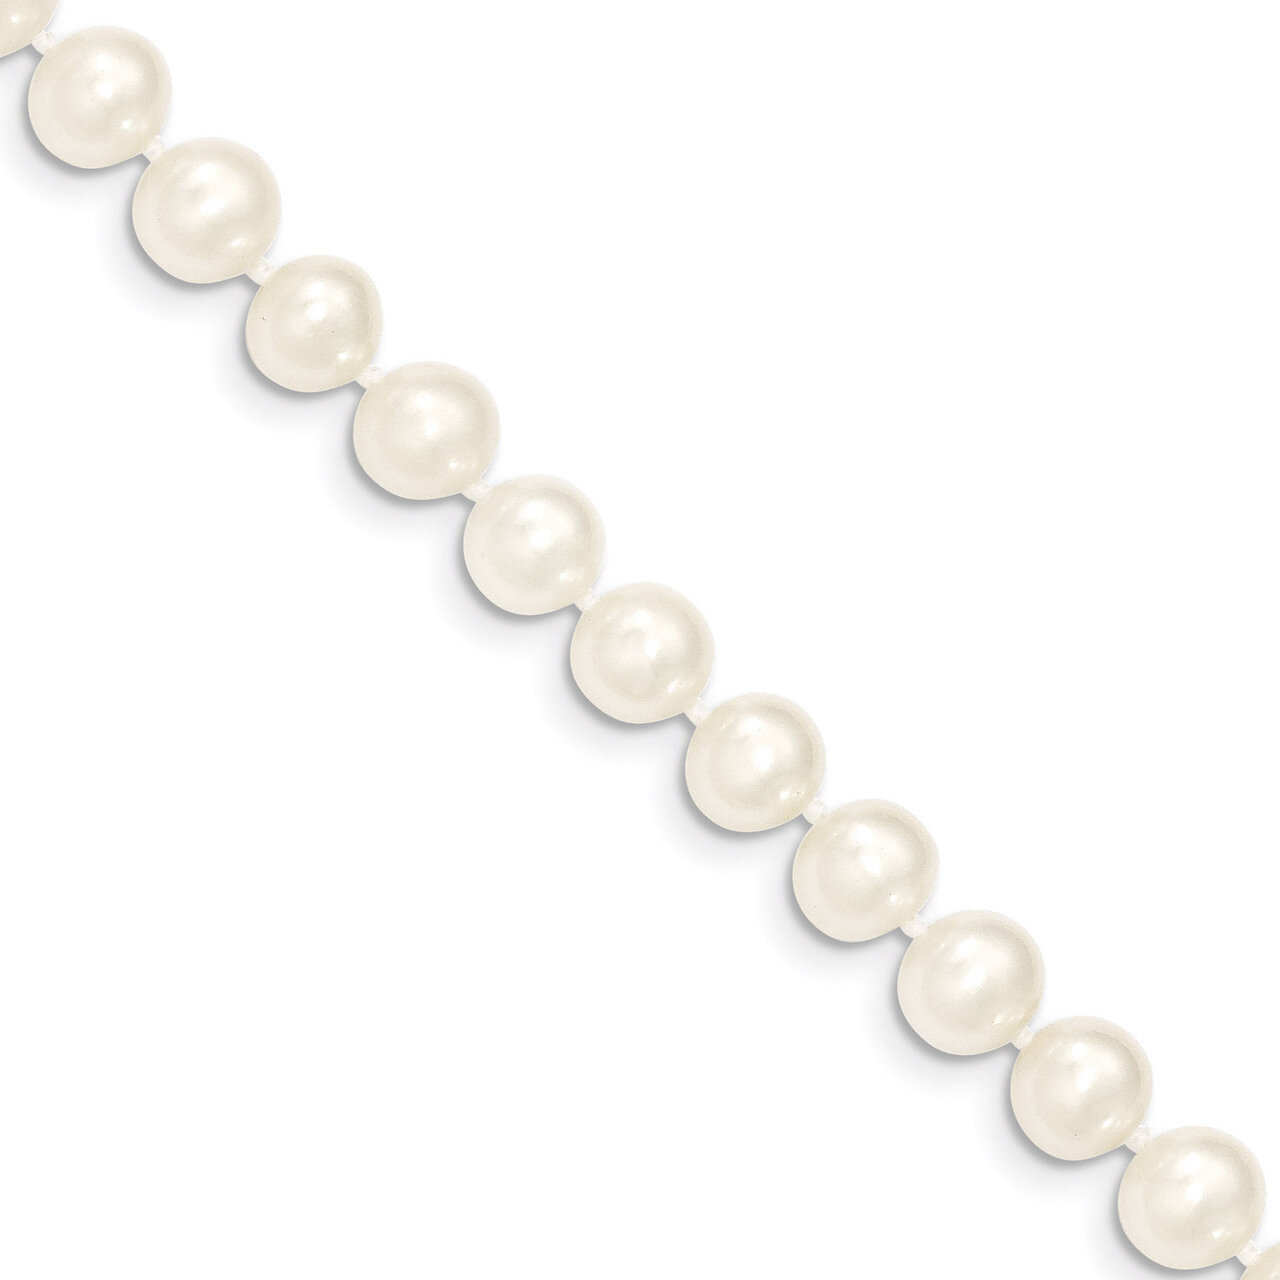 7-8mm White Cultured Near Round Pearl Necklace 16 Inch 14k Gold WPN070-16